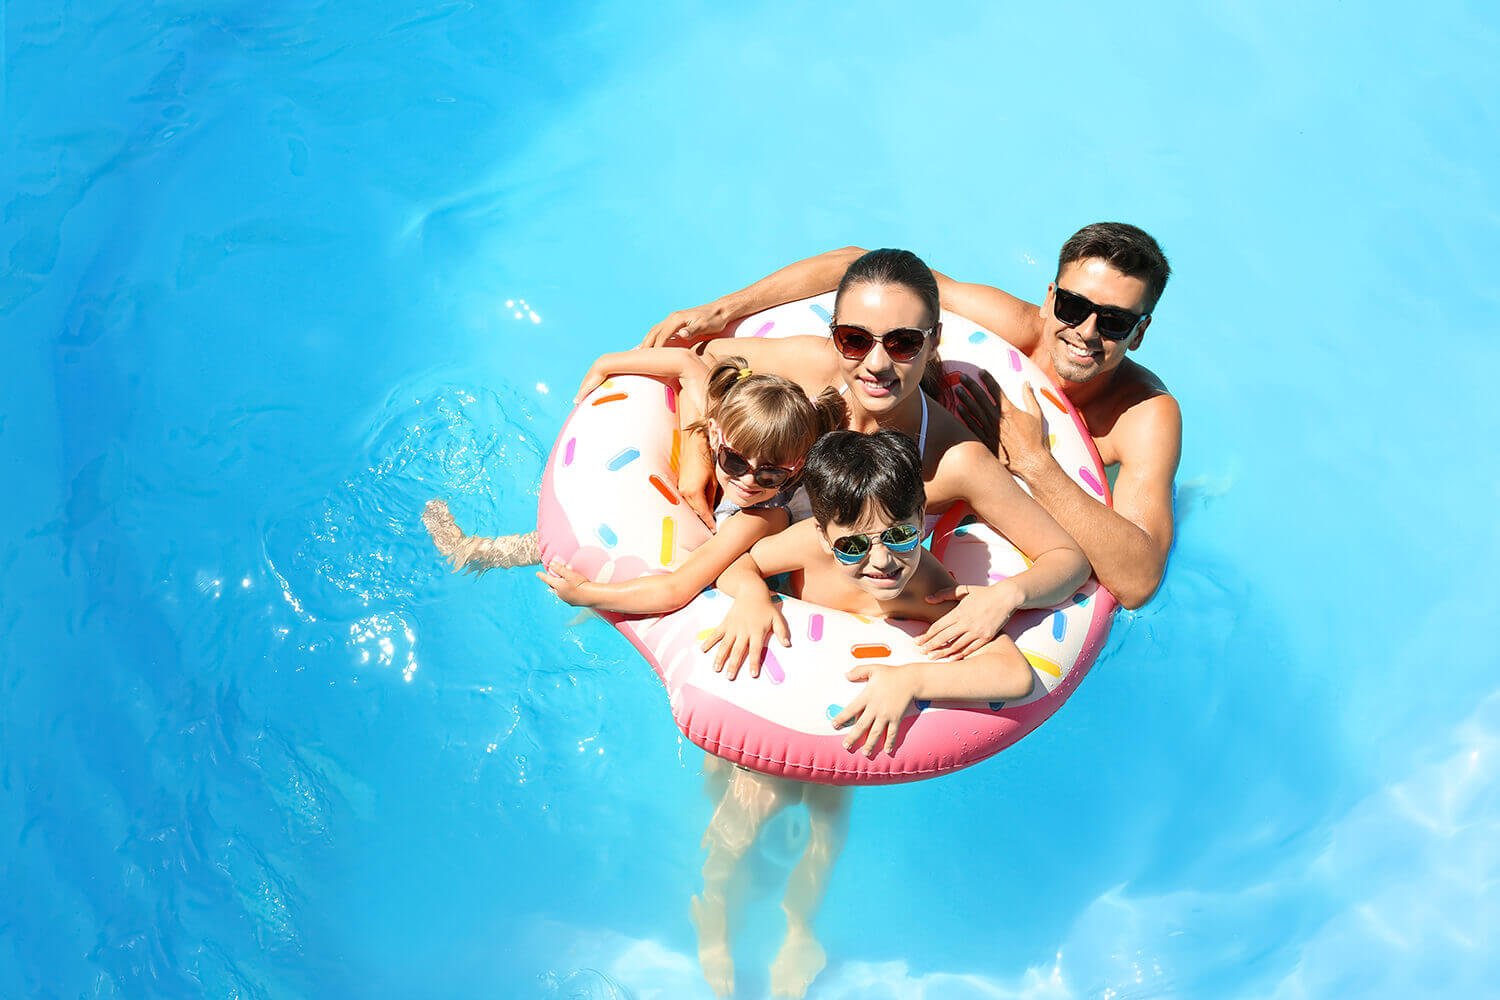 A new year of good resolutions… It’s time to build your Aboral swimming pool